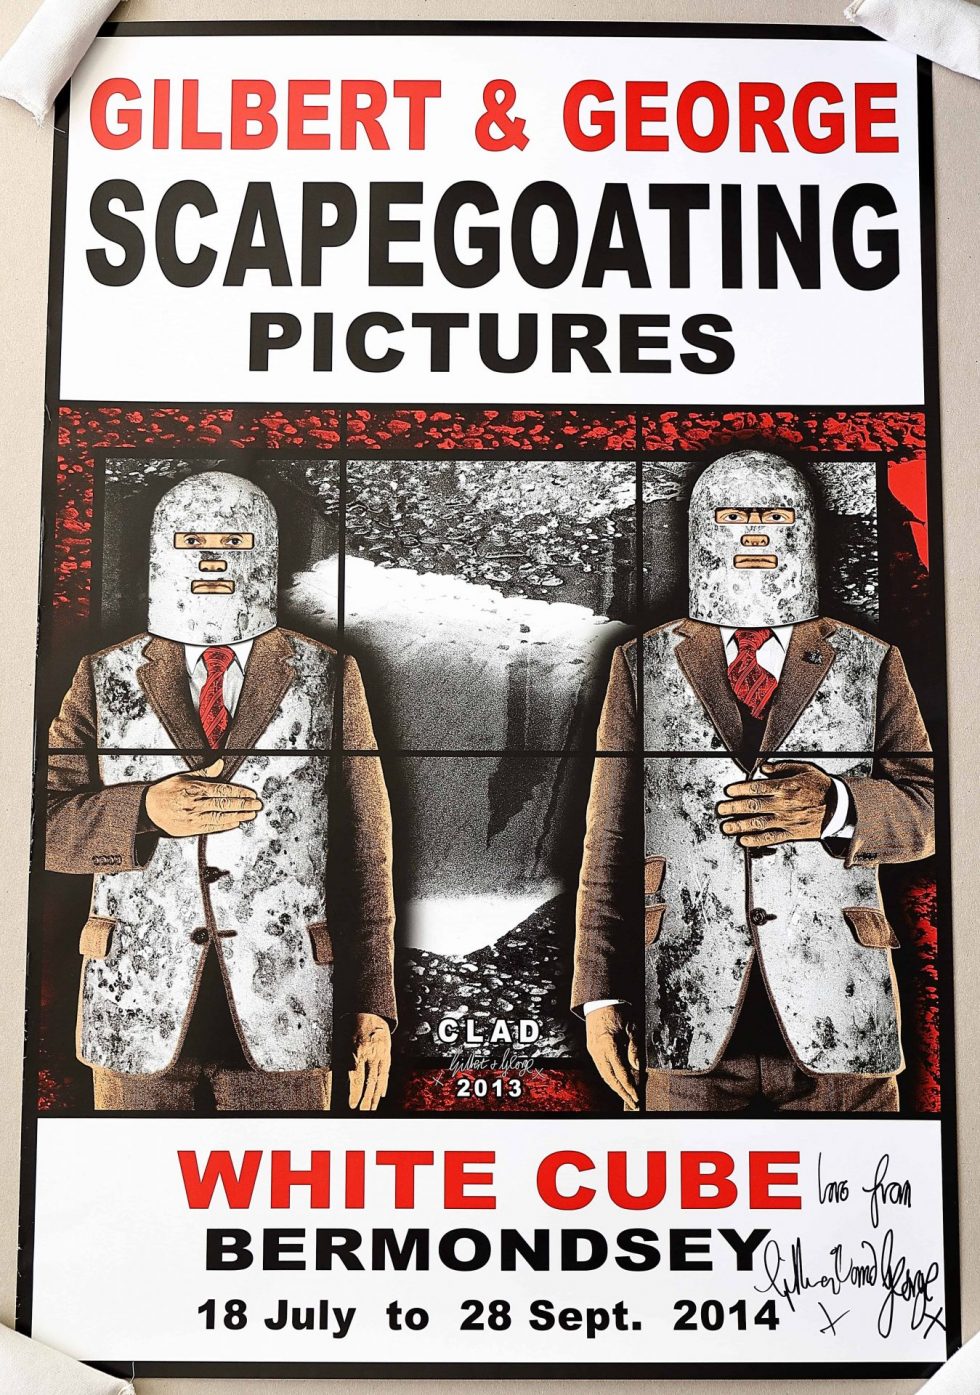 Lot #14911 – Gilbert & George Signed Scapegoating Pictures Clad Poster Art Gilbert & George